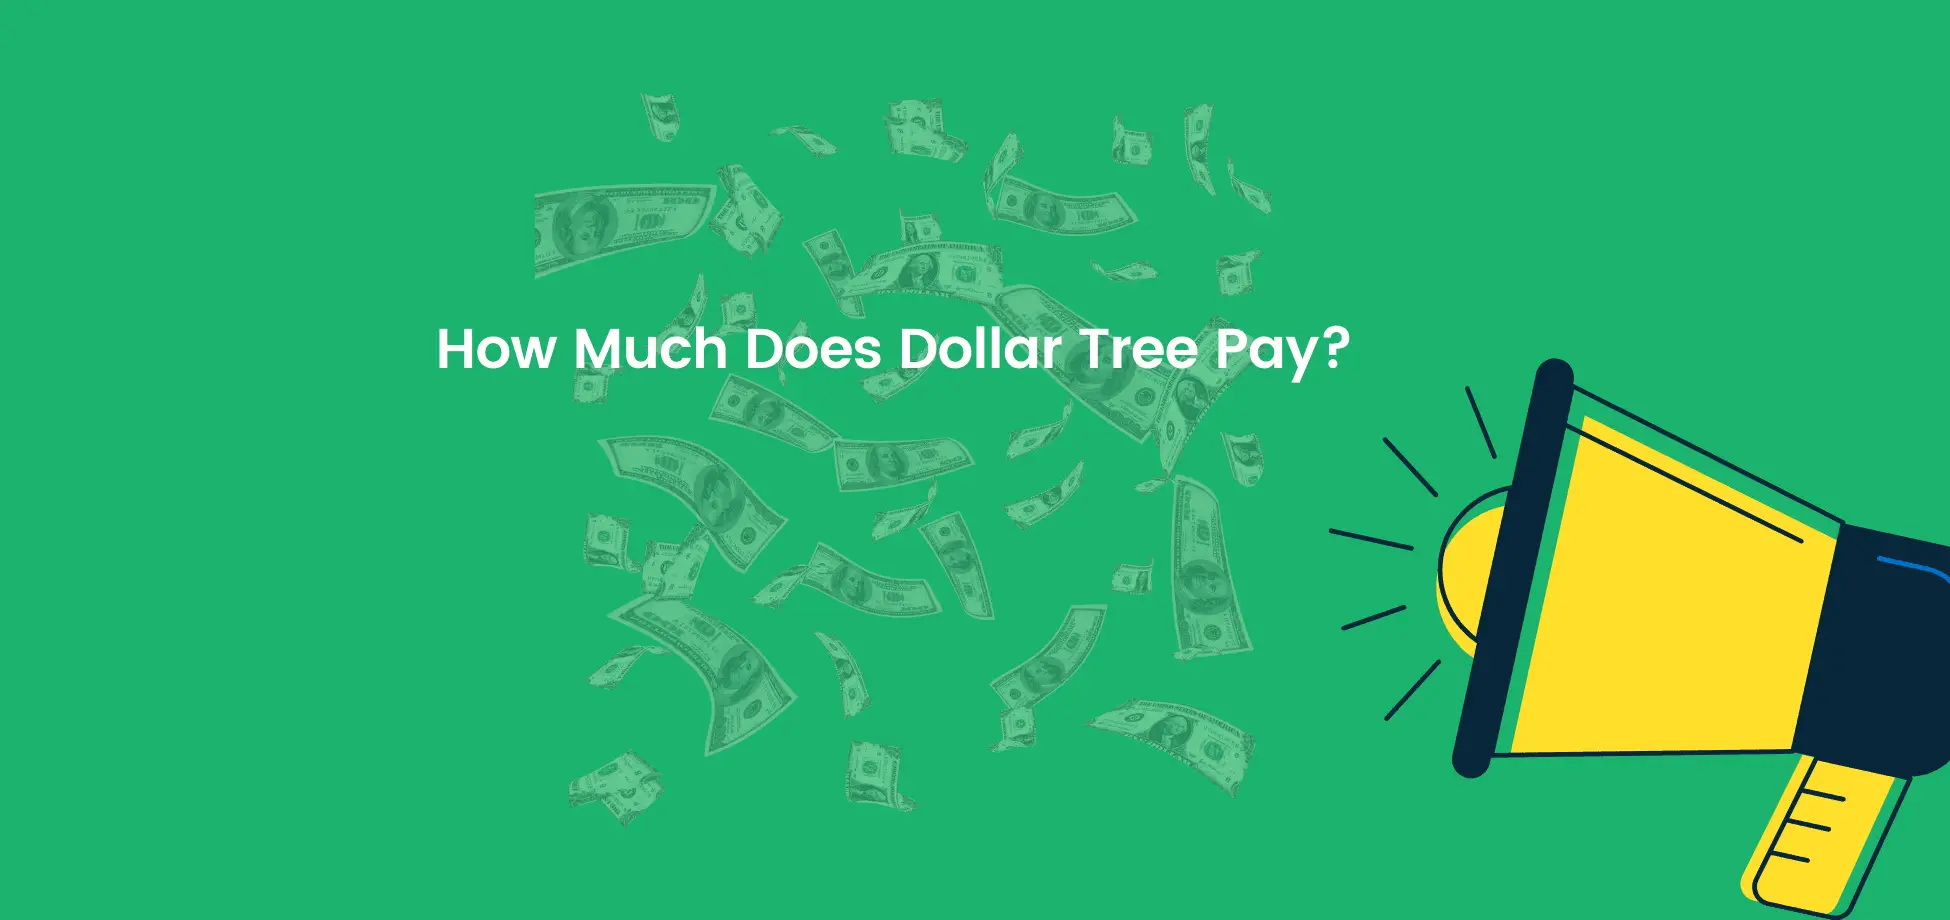 The Dollar Tree minimum wage can use a lot of improvement, according to most of its workers.